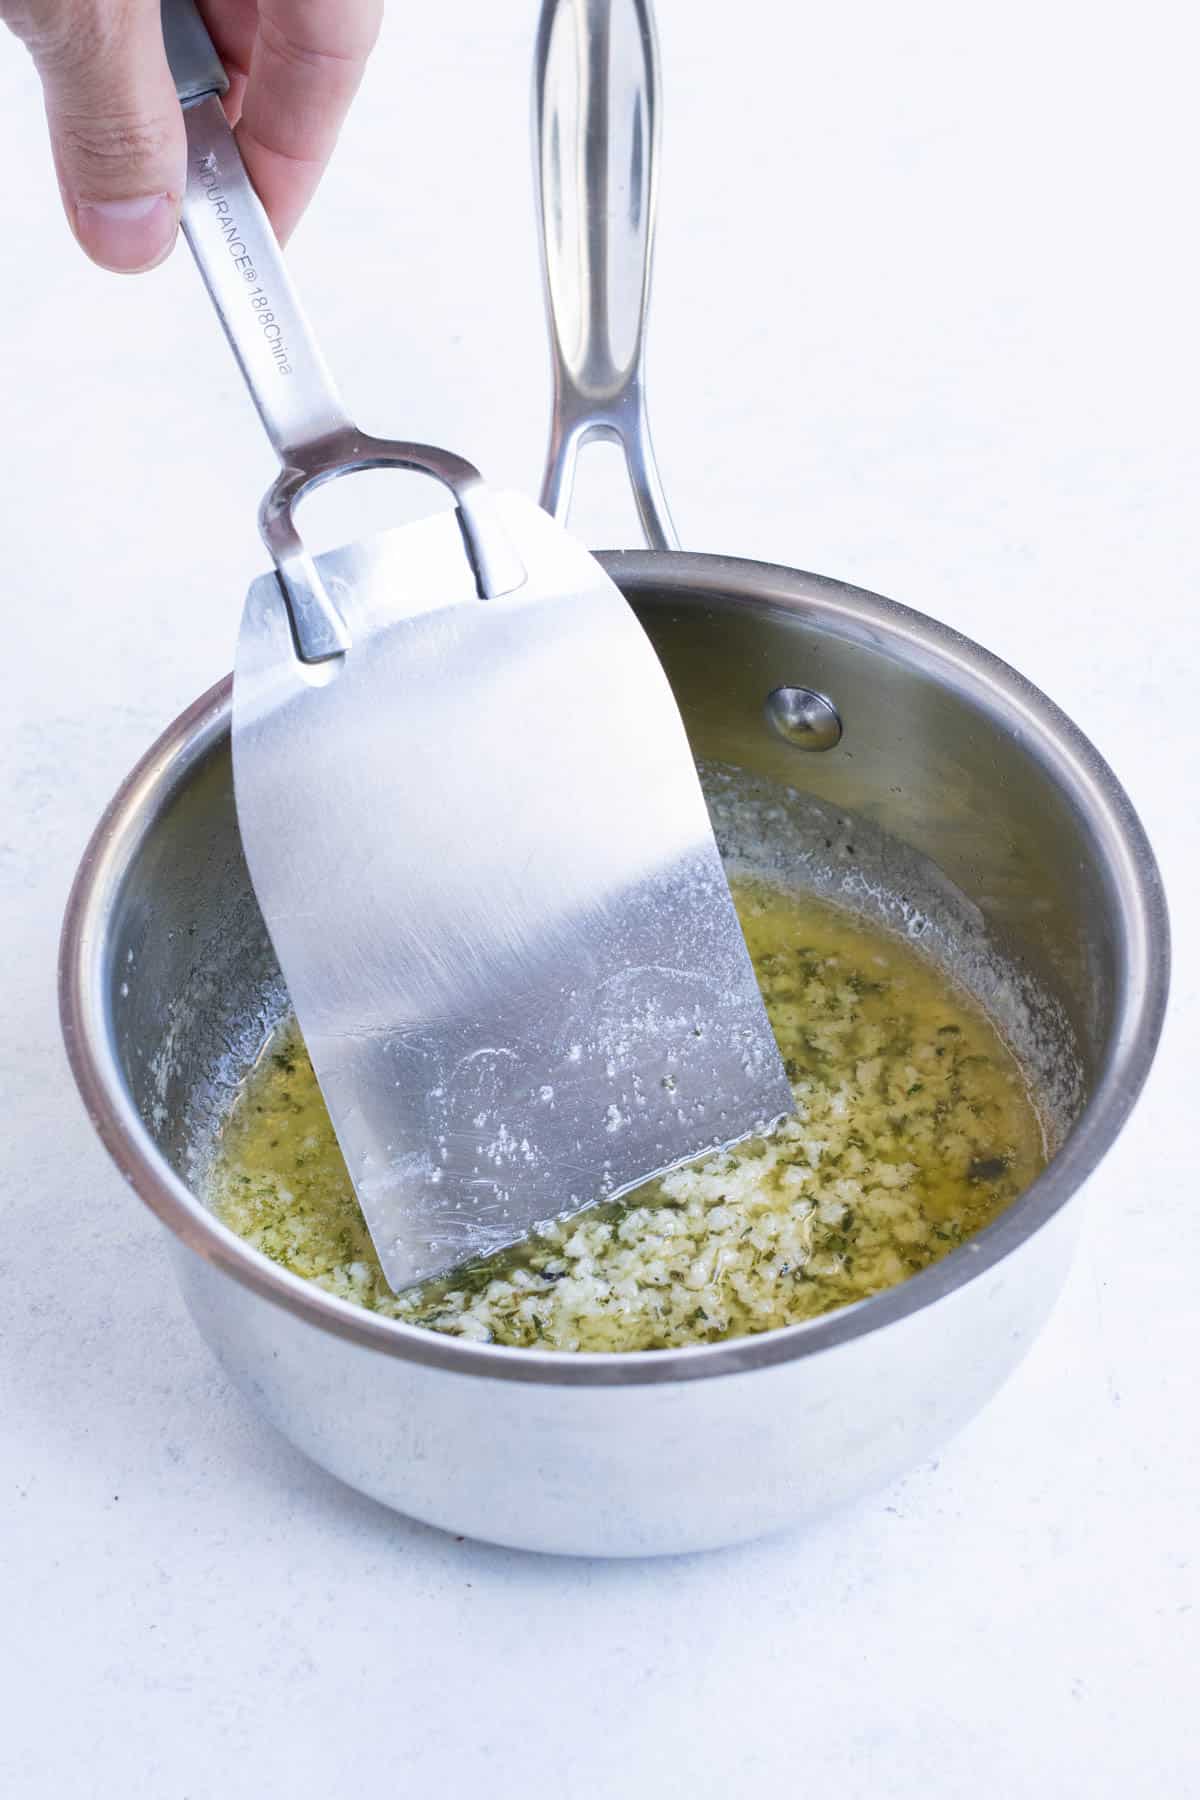 Butter is infused with garlic and herbs.